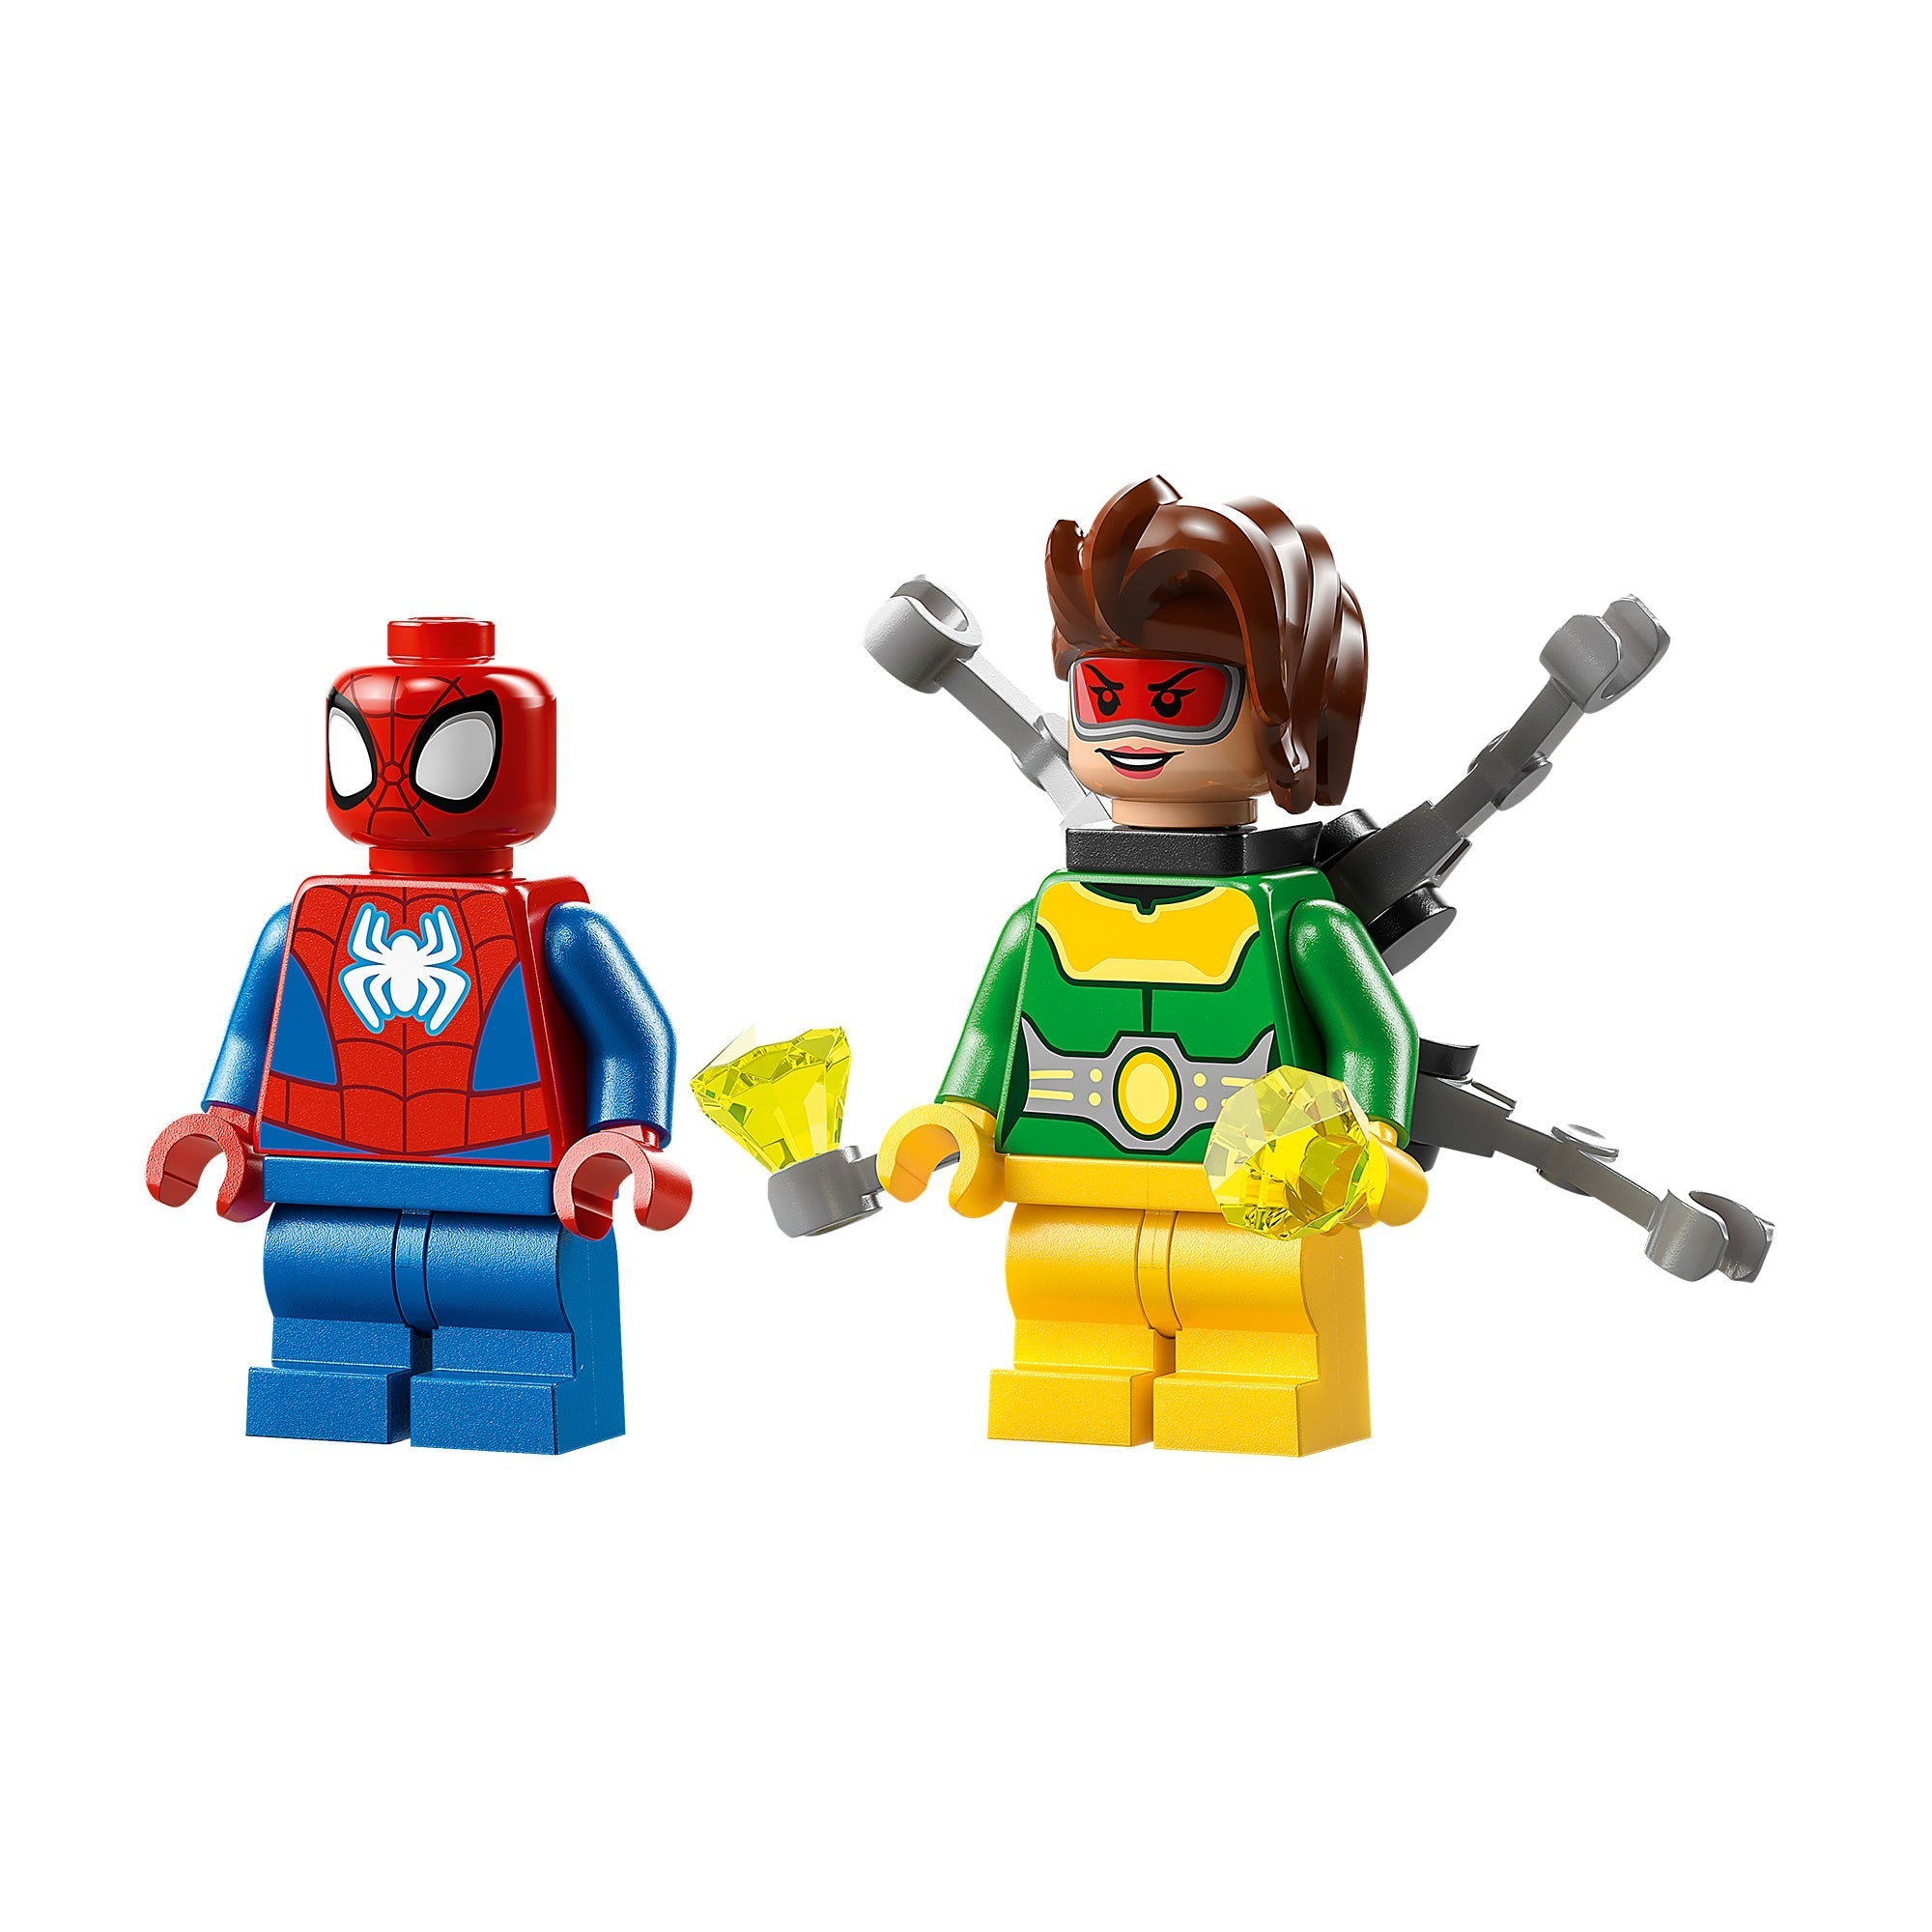  LEGO Marvel Spider-Man's Car and Doc Ock Set 10789, Spidey and  His Amazing Friends Buildable Toy for Kids 4 Plus Years Old with Glow in  The Dark Pieces : Toys 